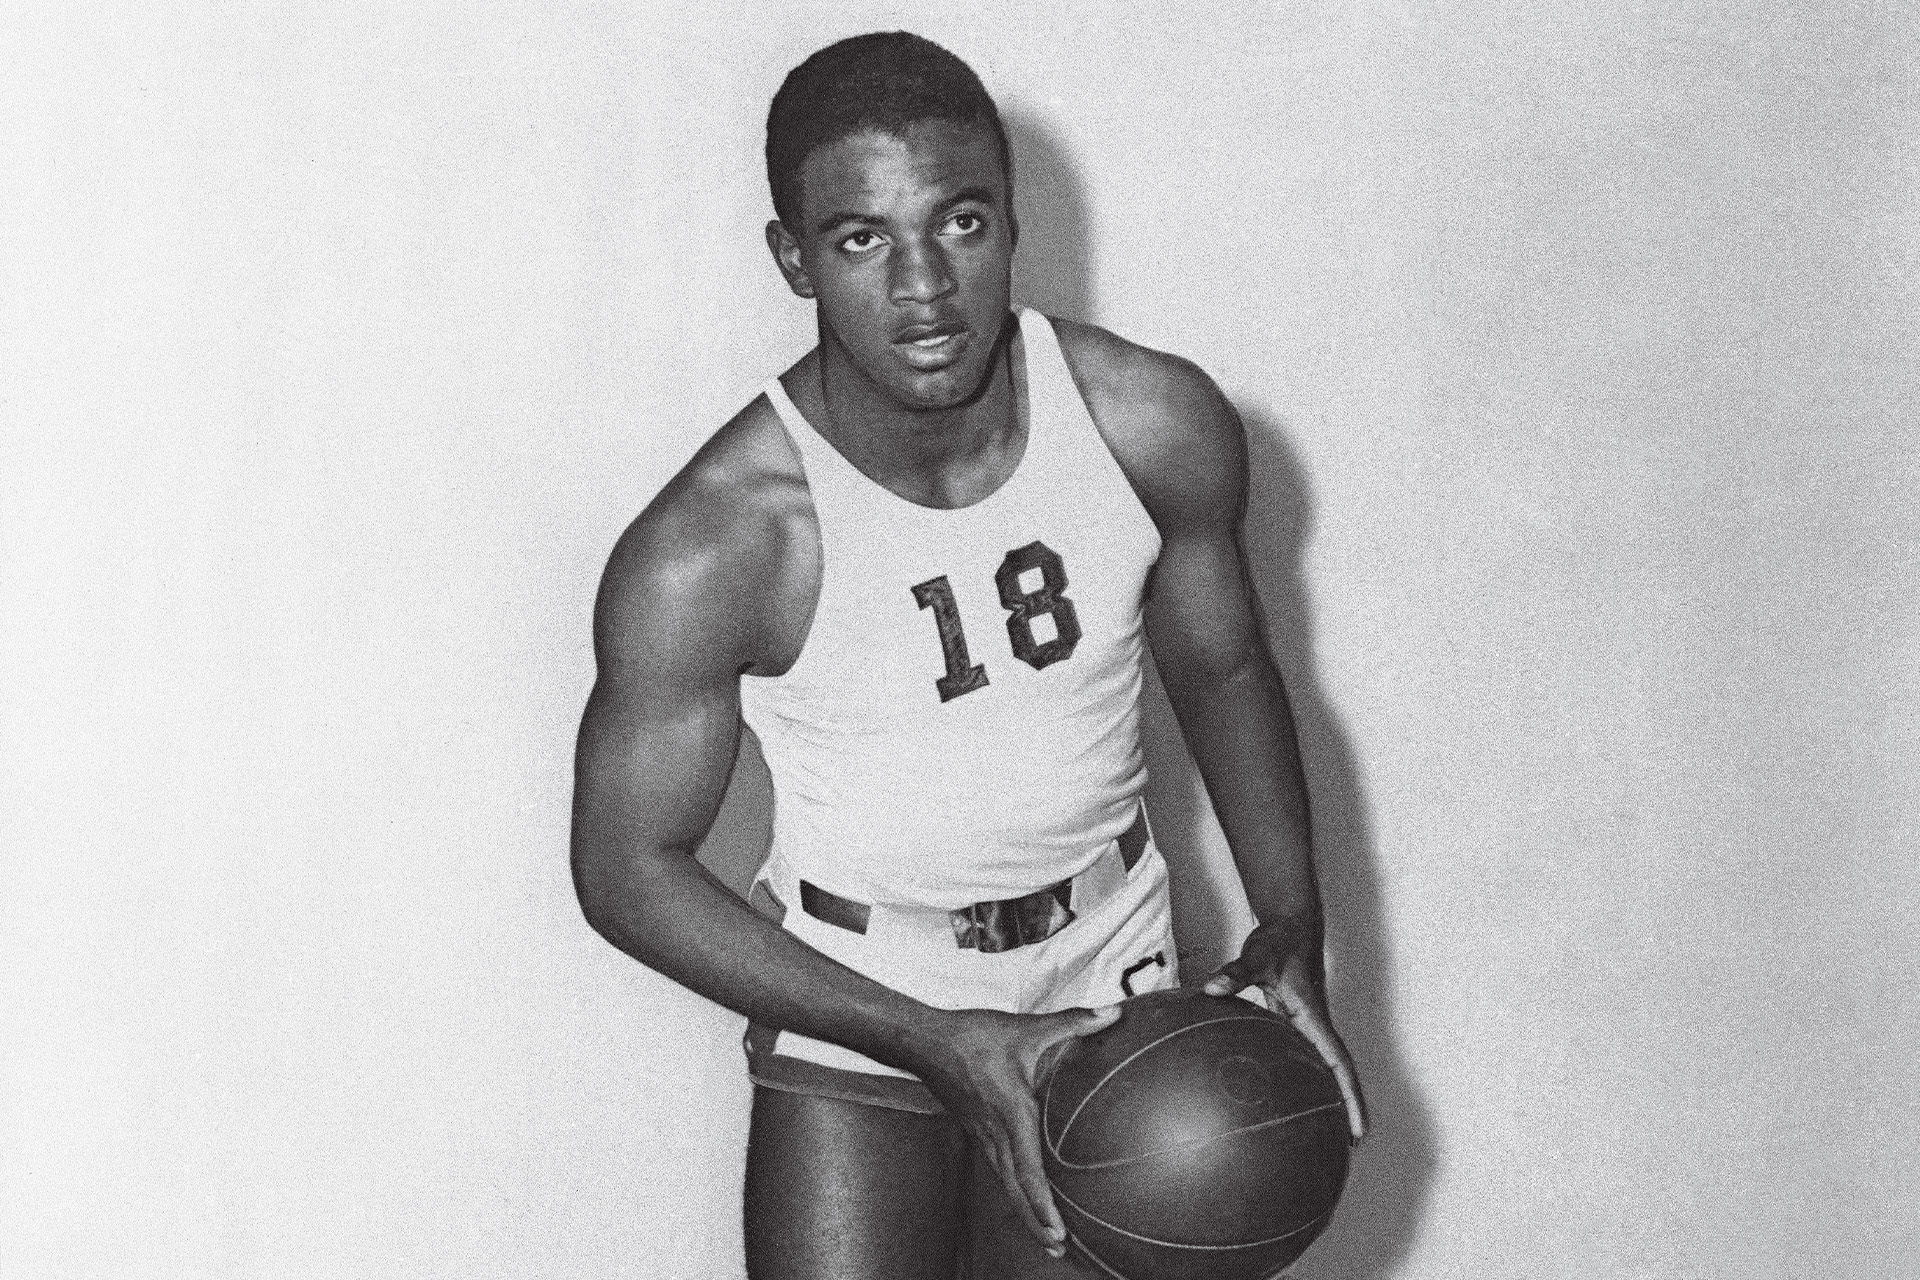 You Don’t Know Jack: Here’s a Look Back on Jackie Robinson’s Basketball Career at UCLA